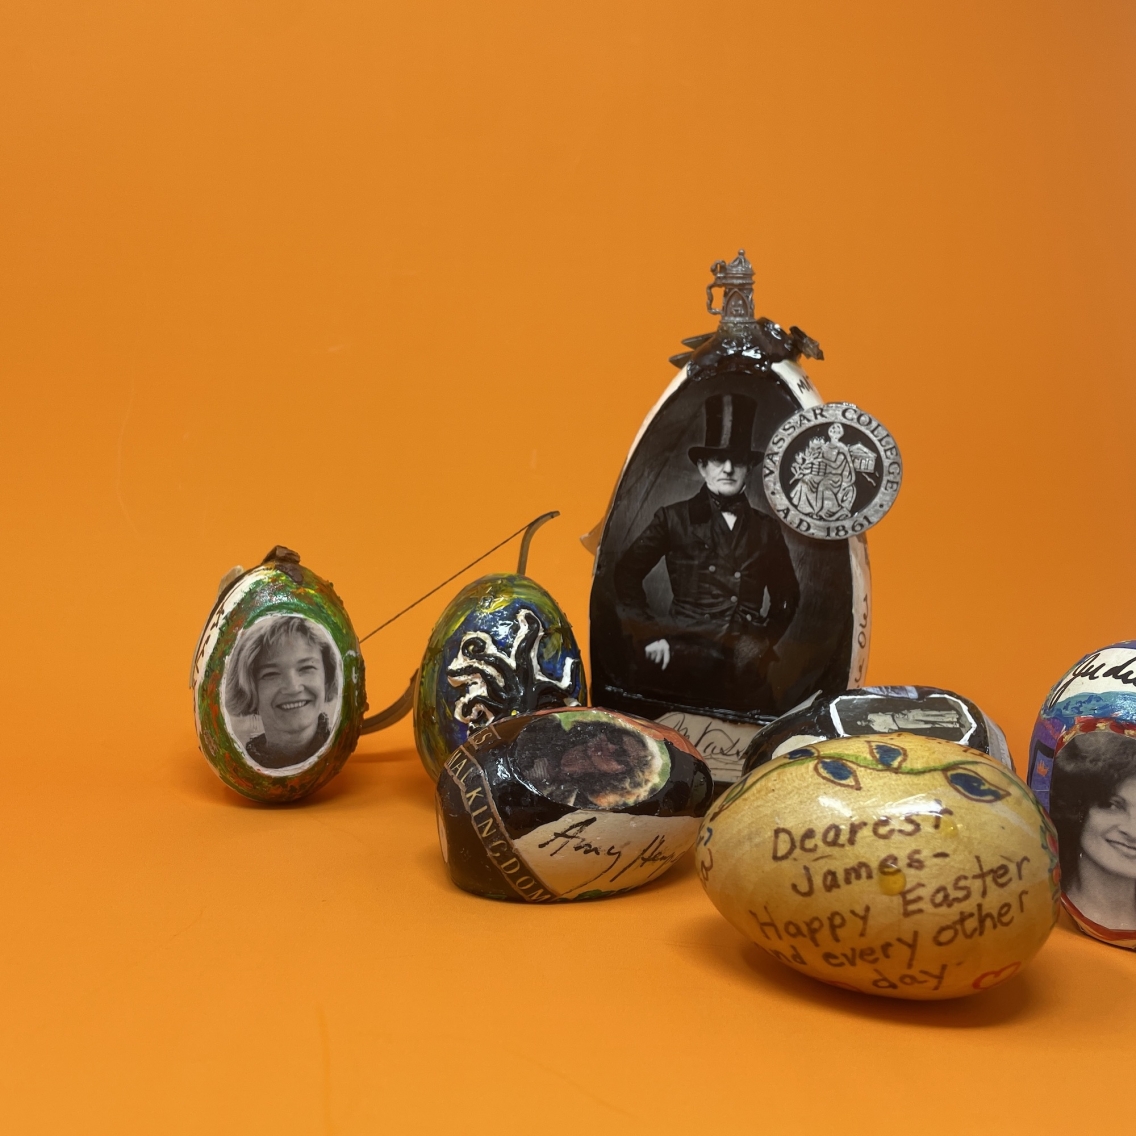 Seven wooden eggs painted and decorated by Nancy Willard, against an orange background.